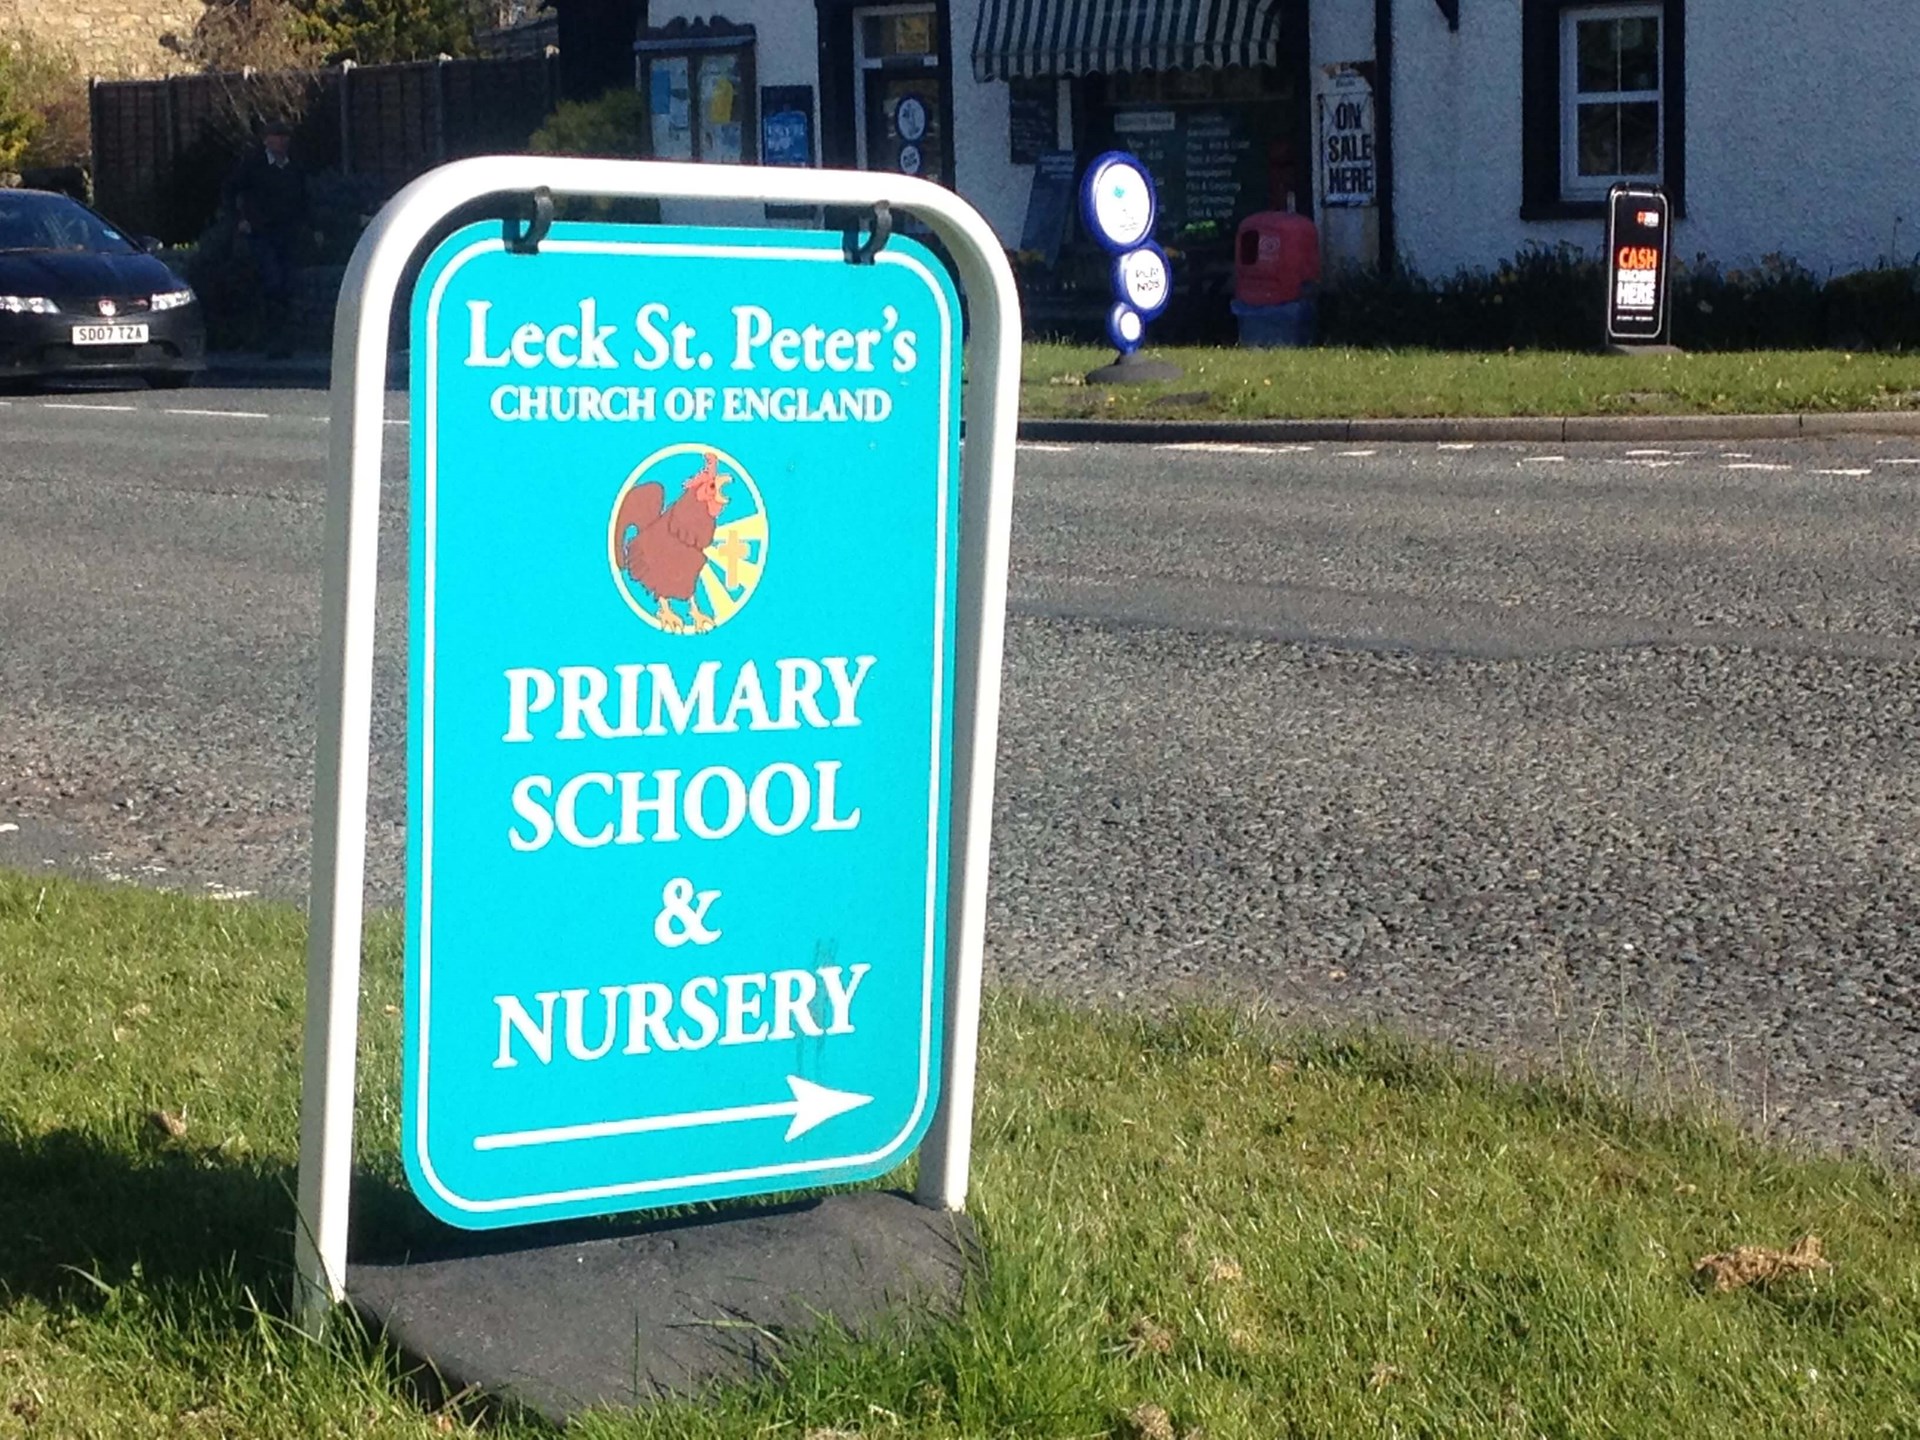 Leck St Peter's Education & Schools Outdoor Business Signs A Boards